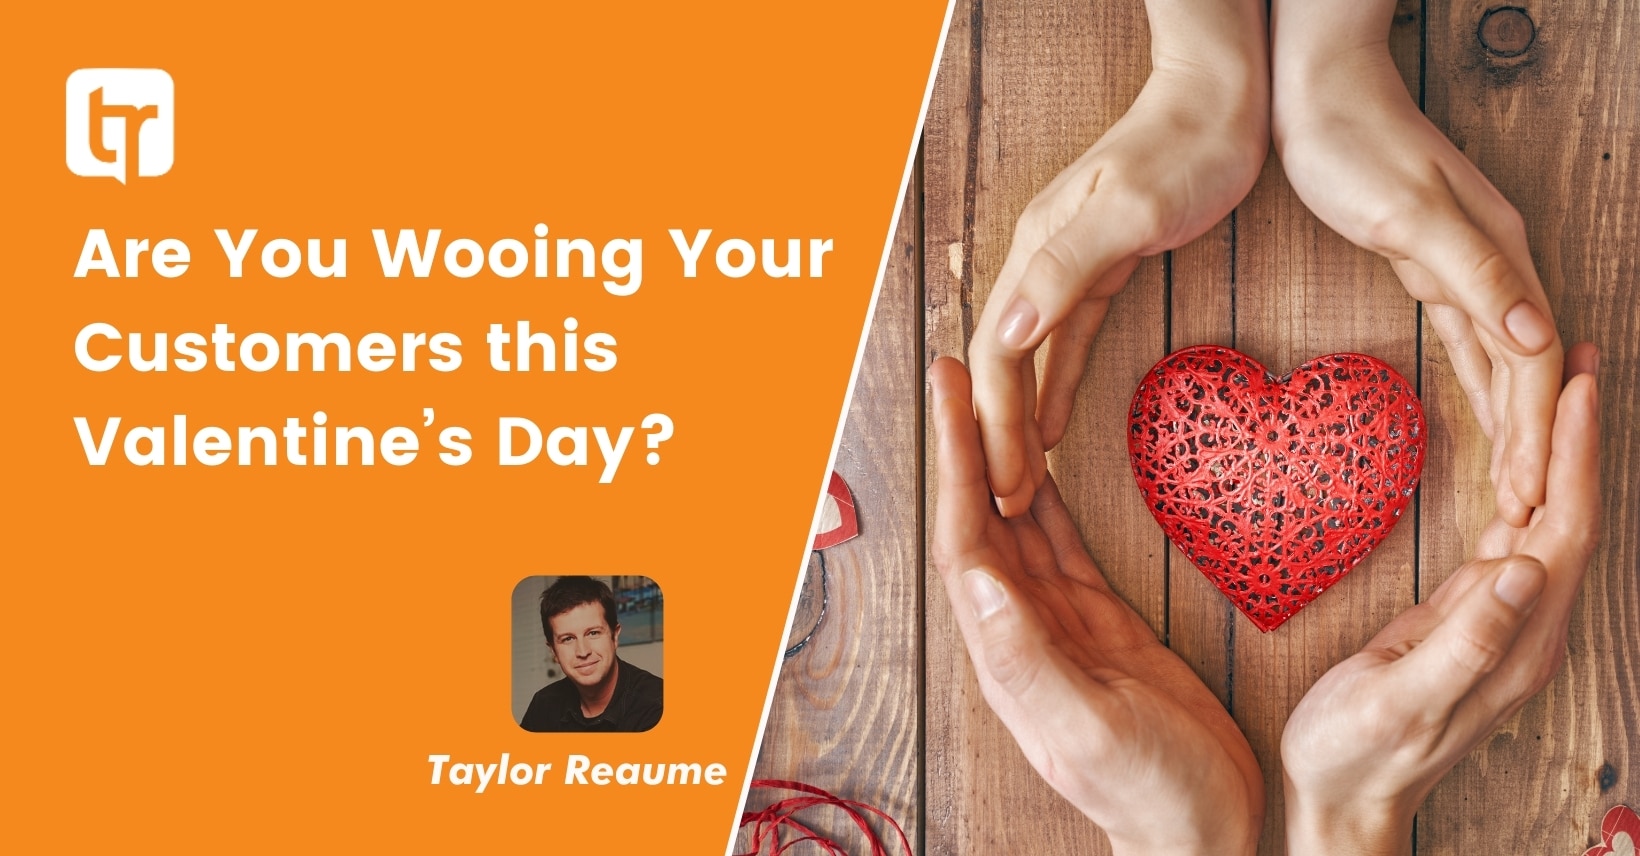 Are You Wooing Your Customers this Valentine’s Day?